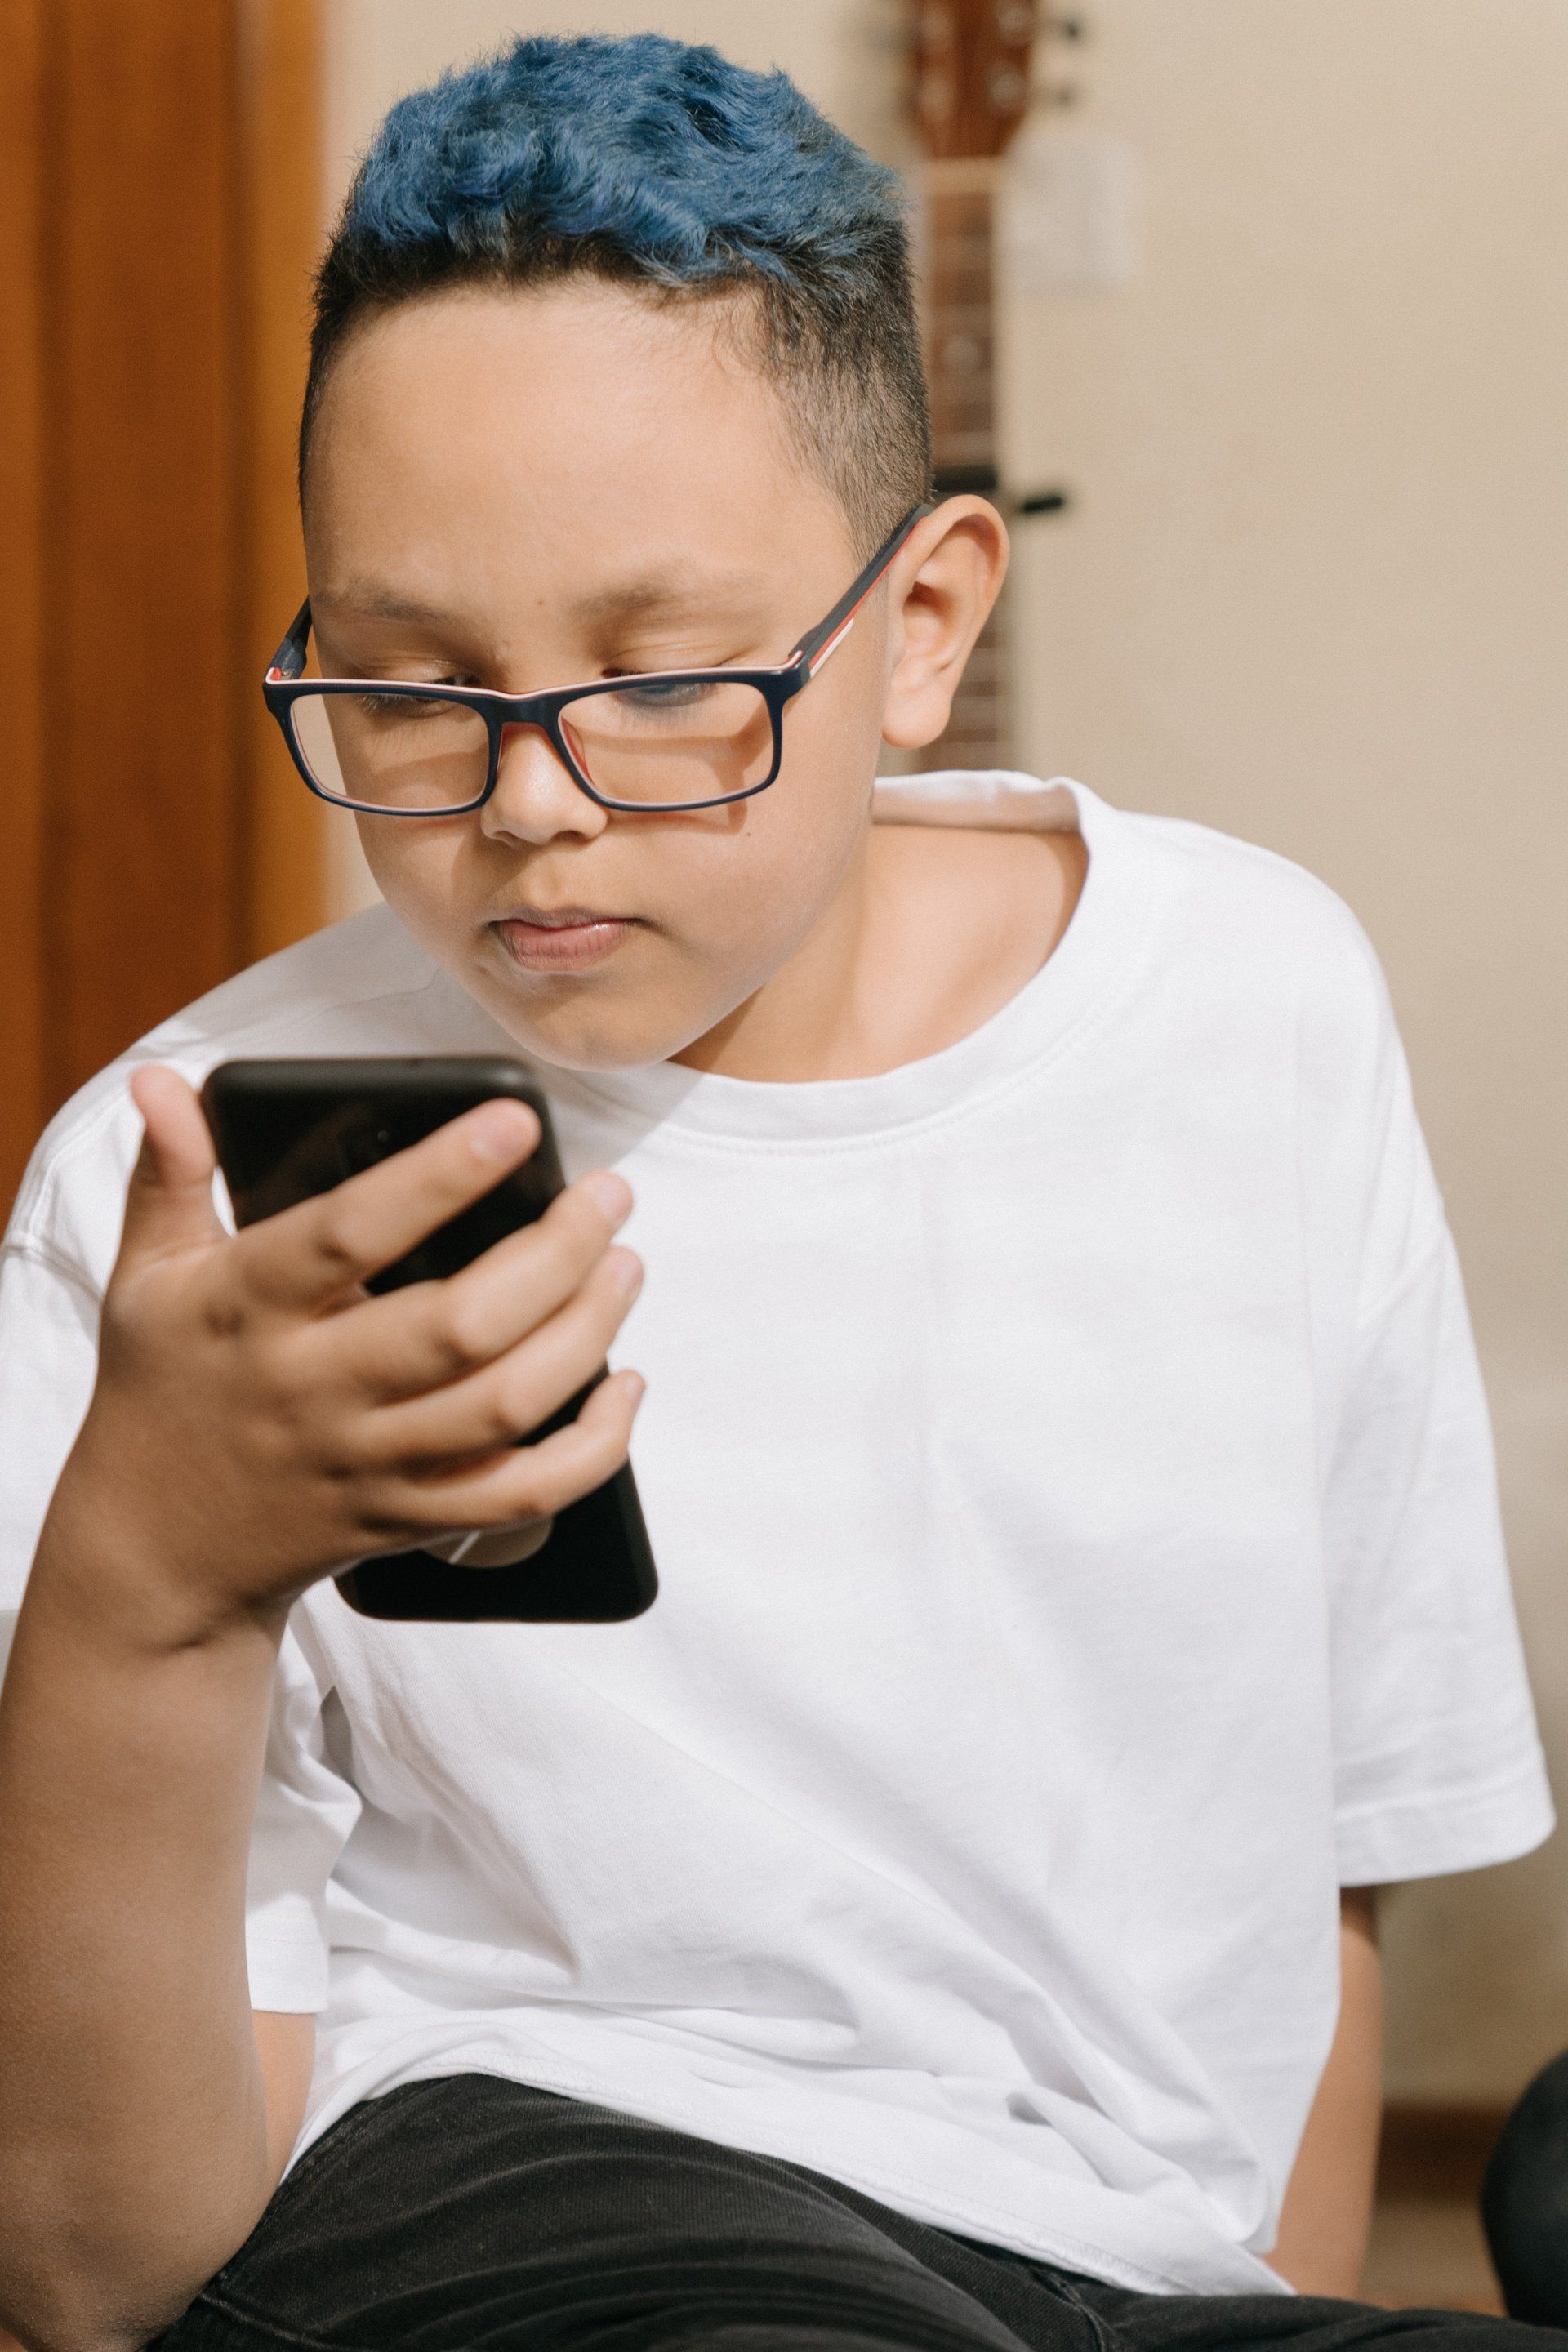 a young boy with blue hair and glasses is using a cell phone .